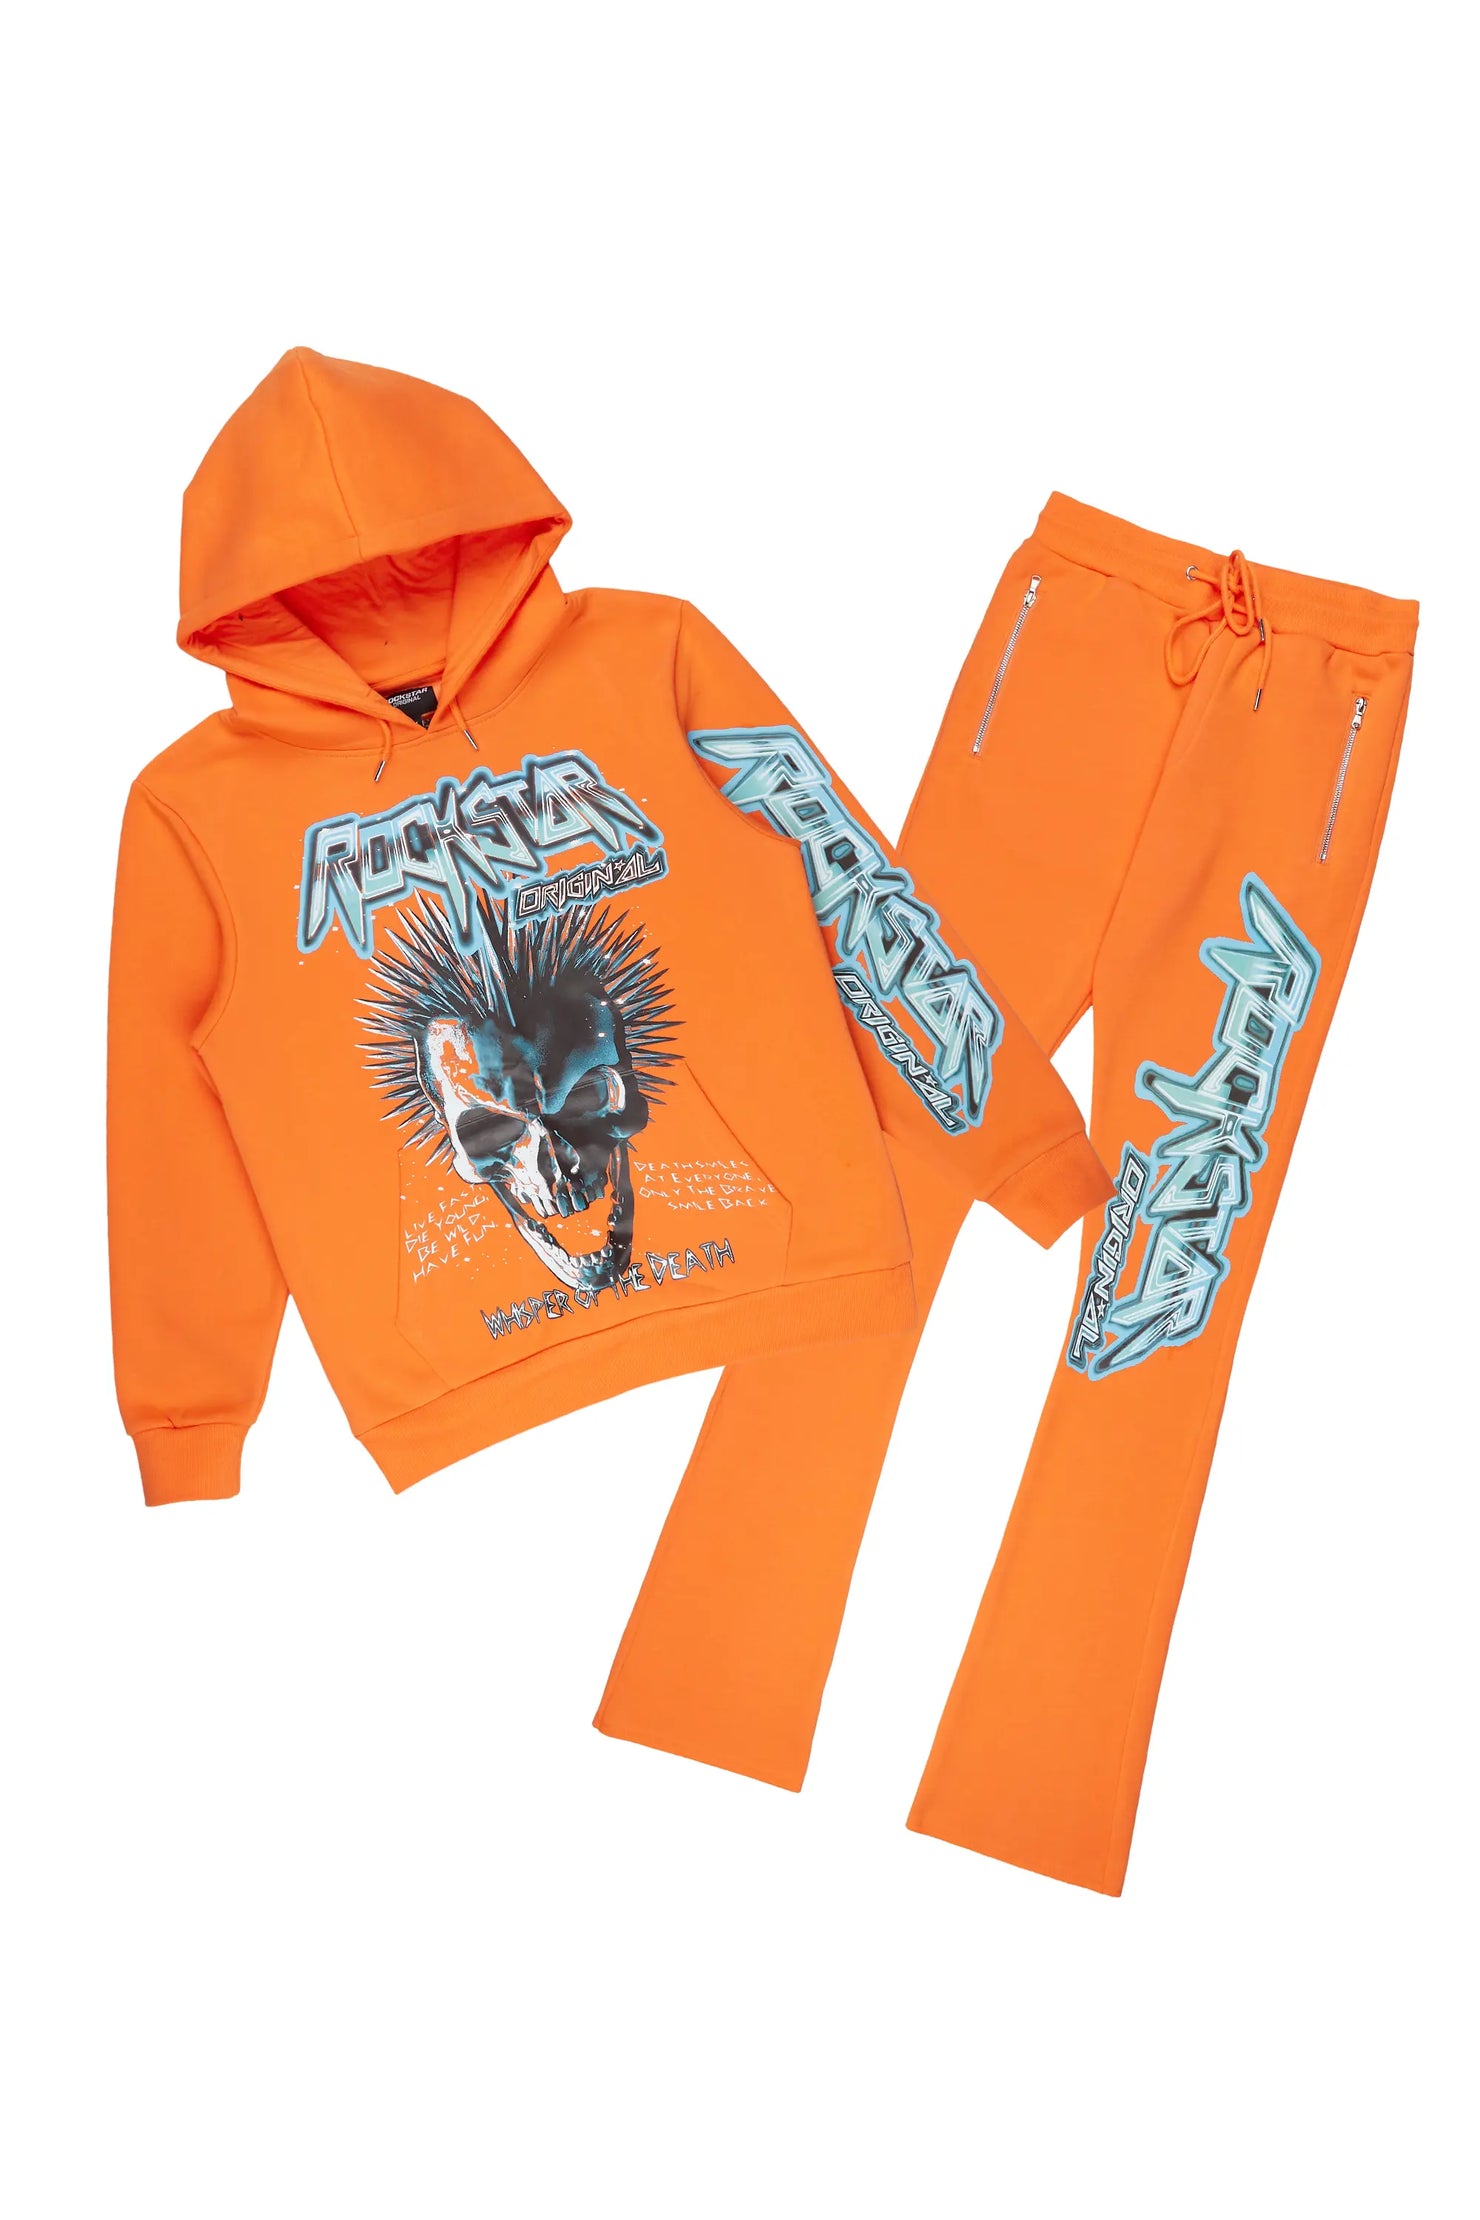 Obern Orange Graphic Hoodie/Stacked Flare Pant Track Set